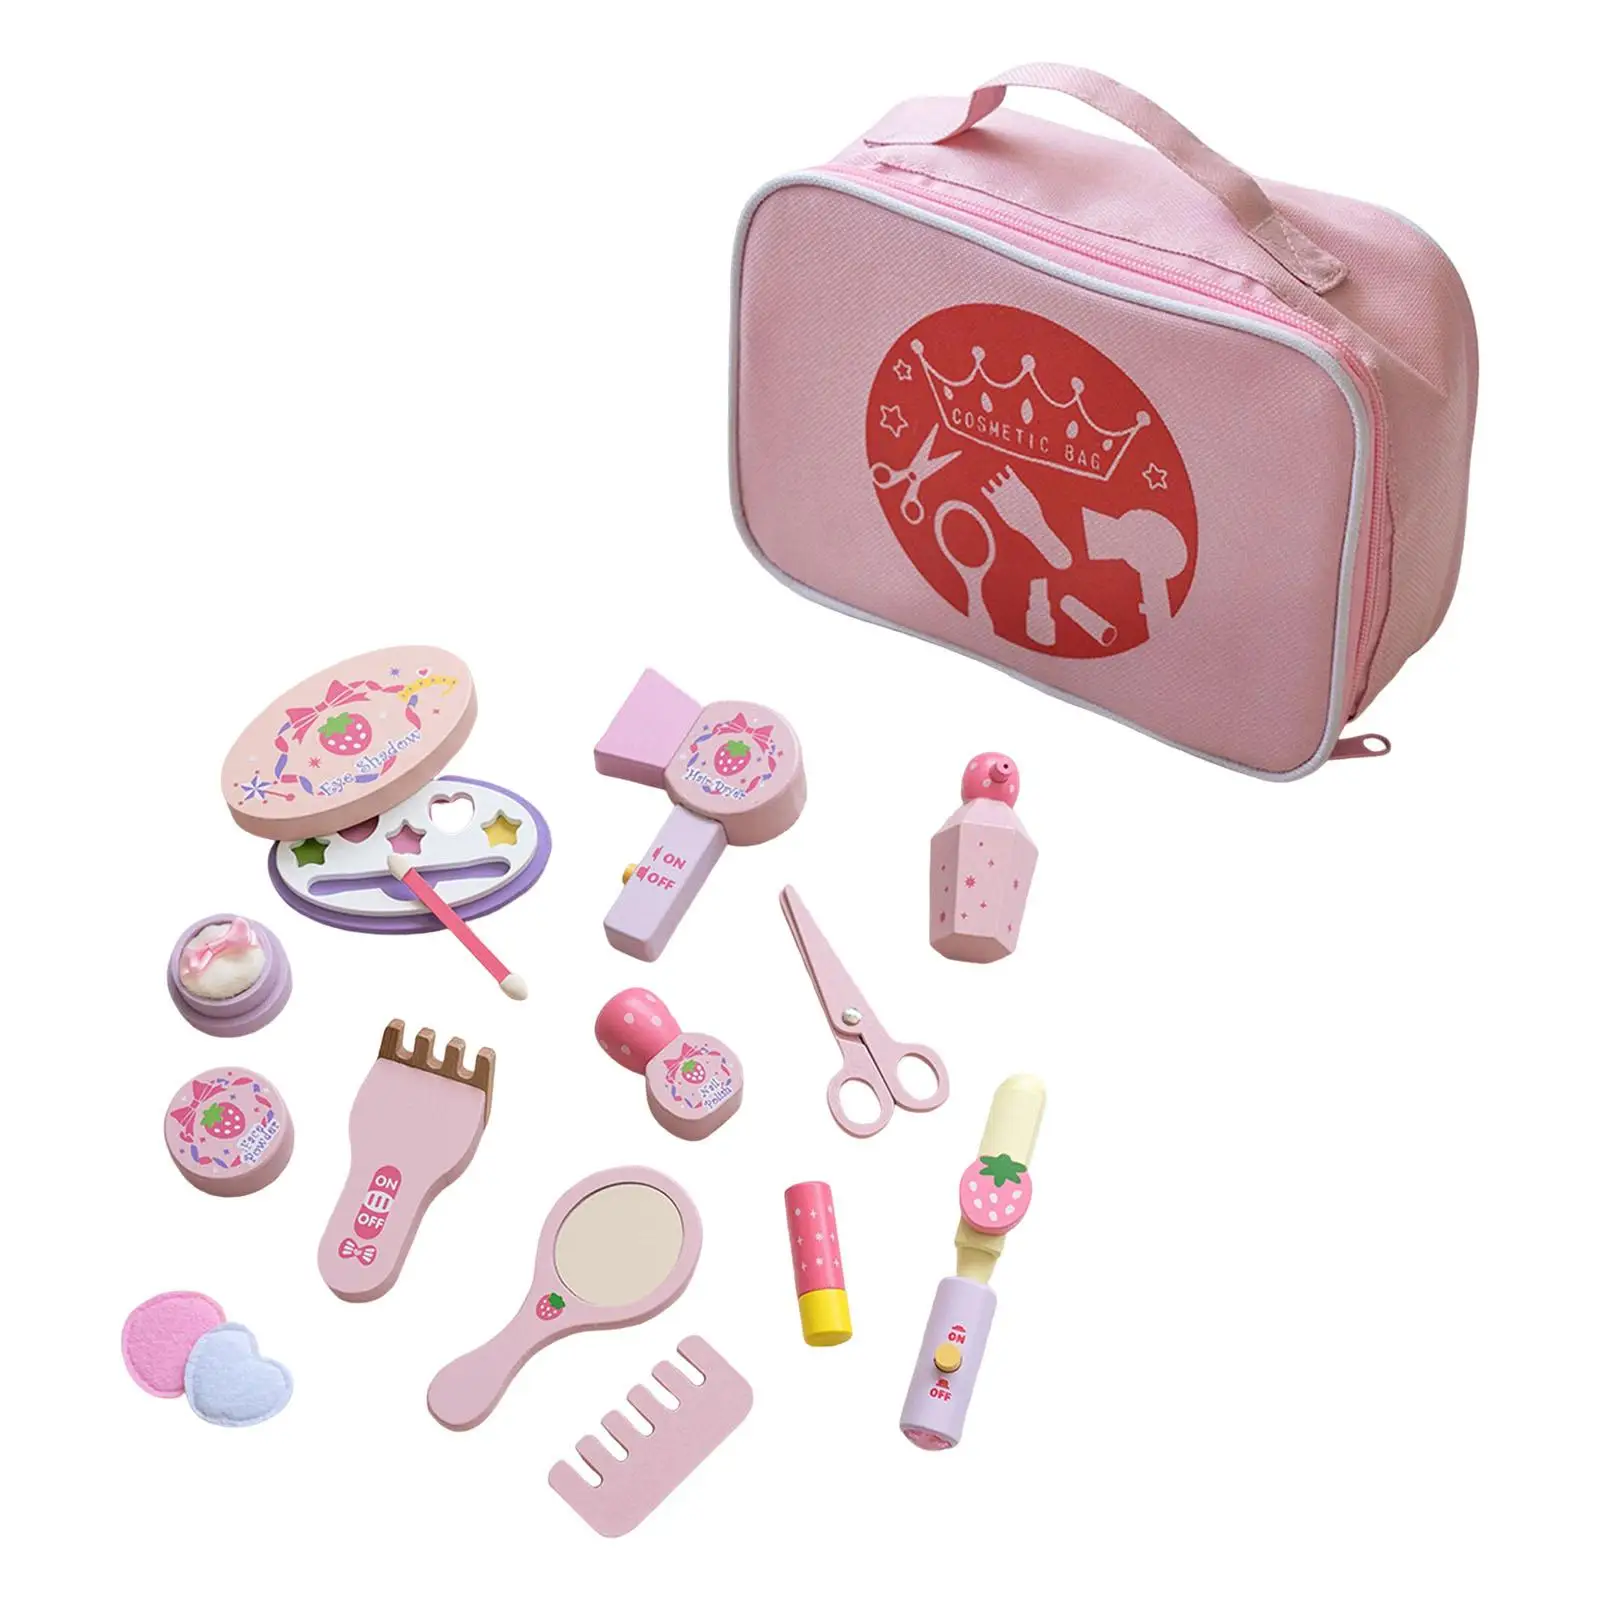 Makeup Kit Gifts with Cosmetic Bag Washable for Beginners Girls Toddler